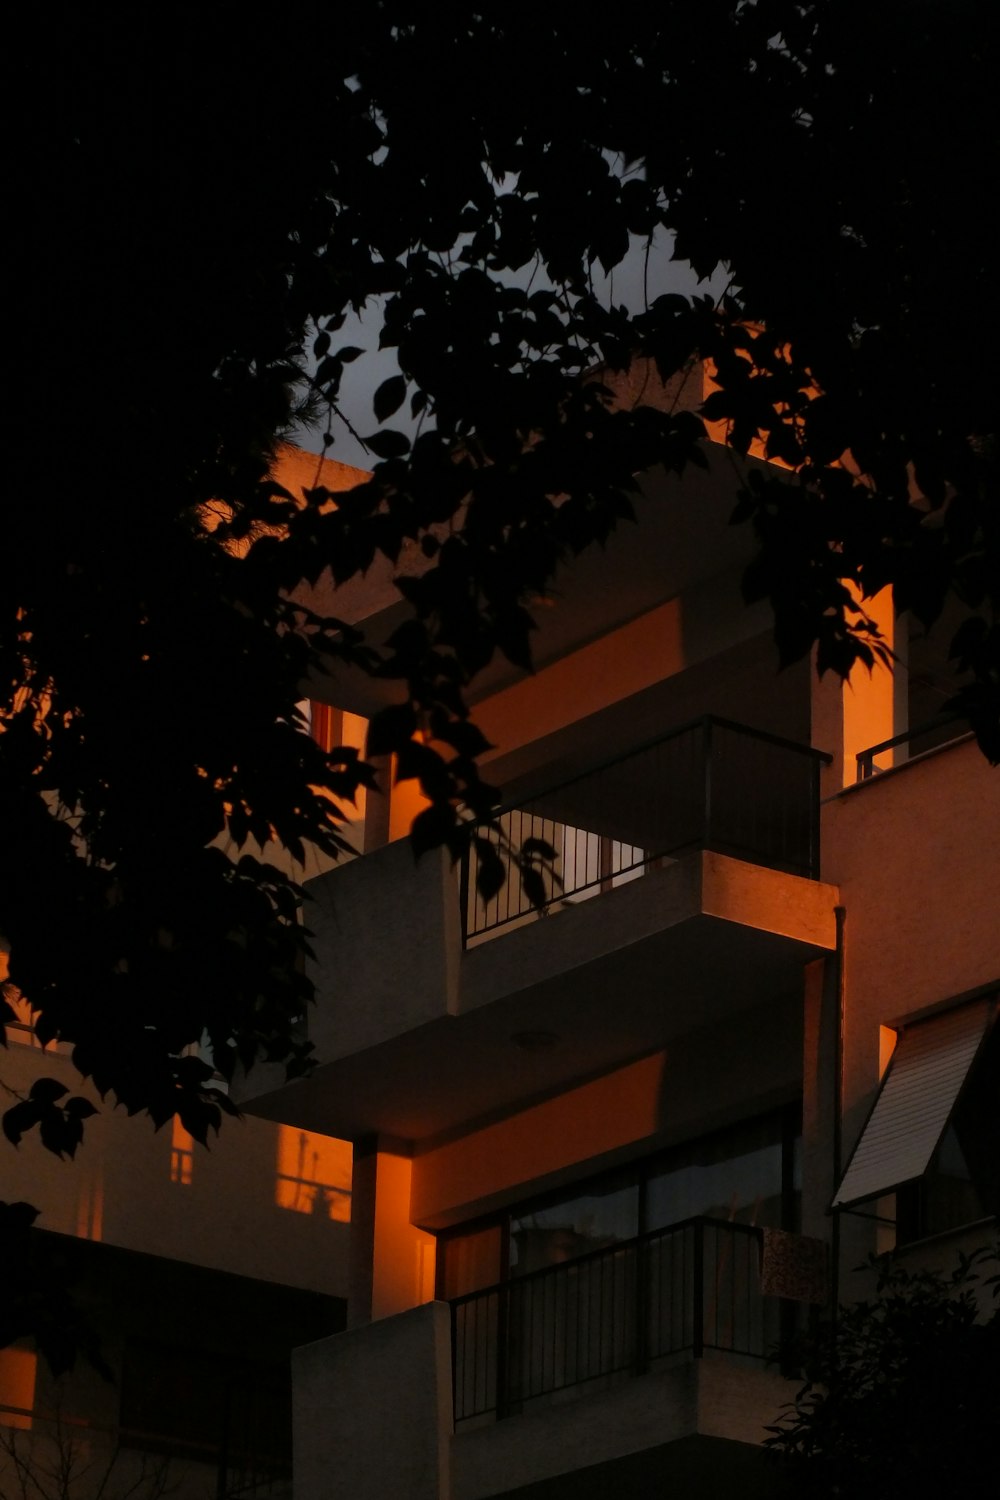 a tall building with a balcony and balconies lit up at night